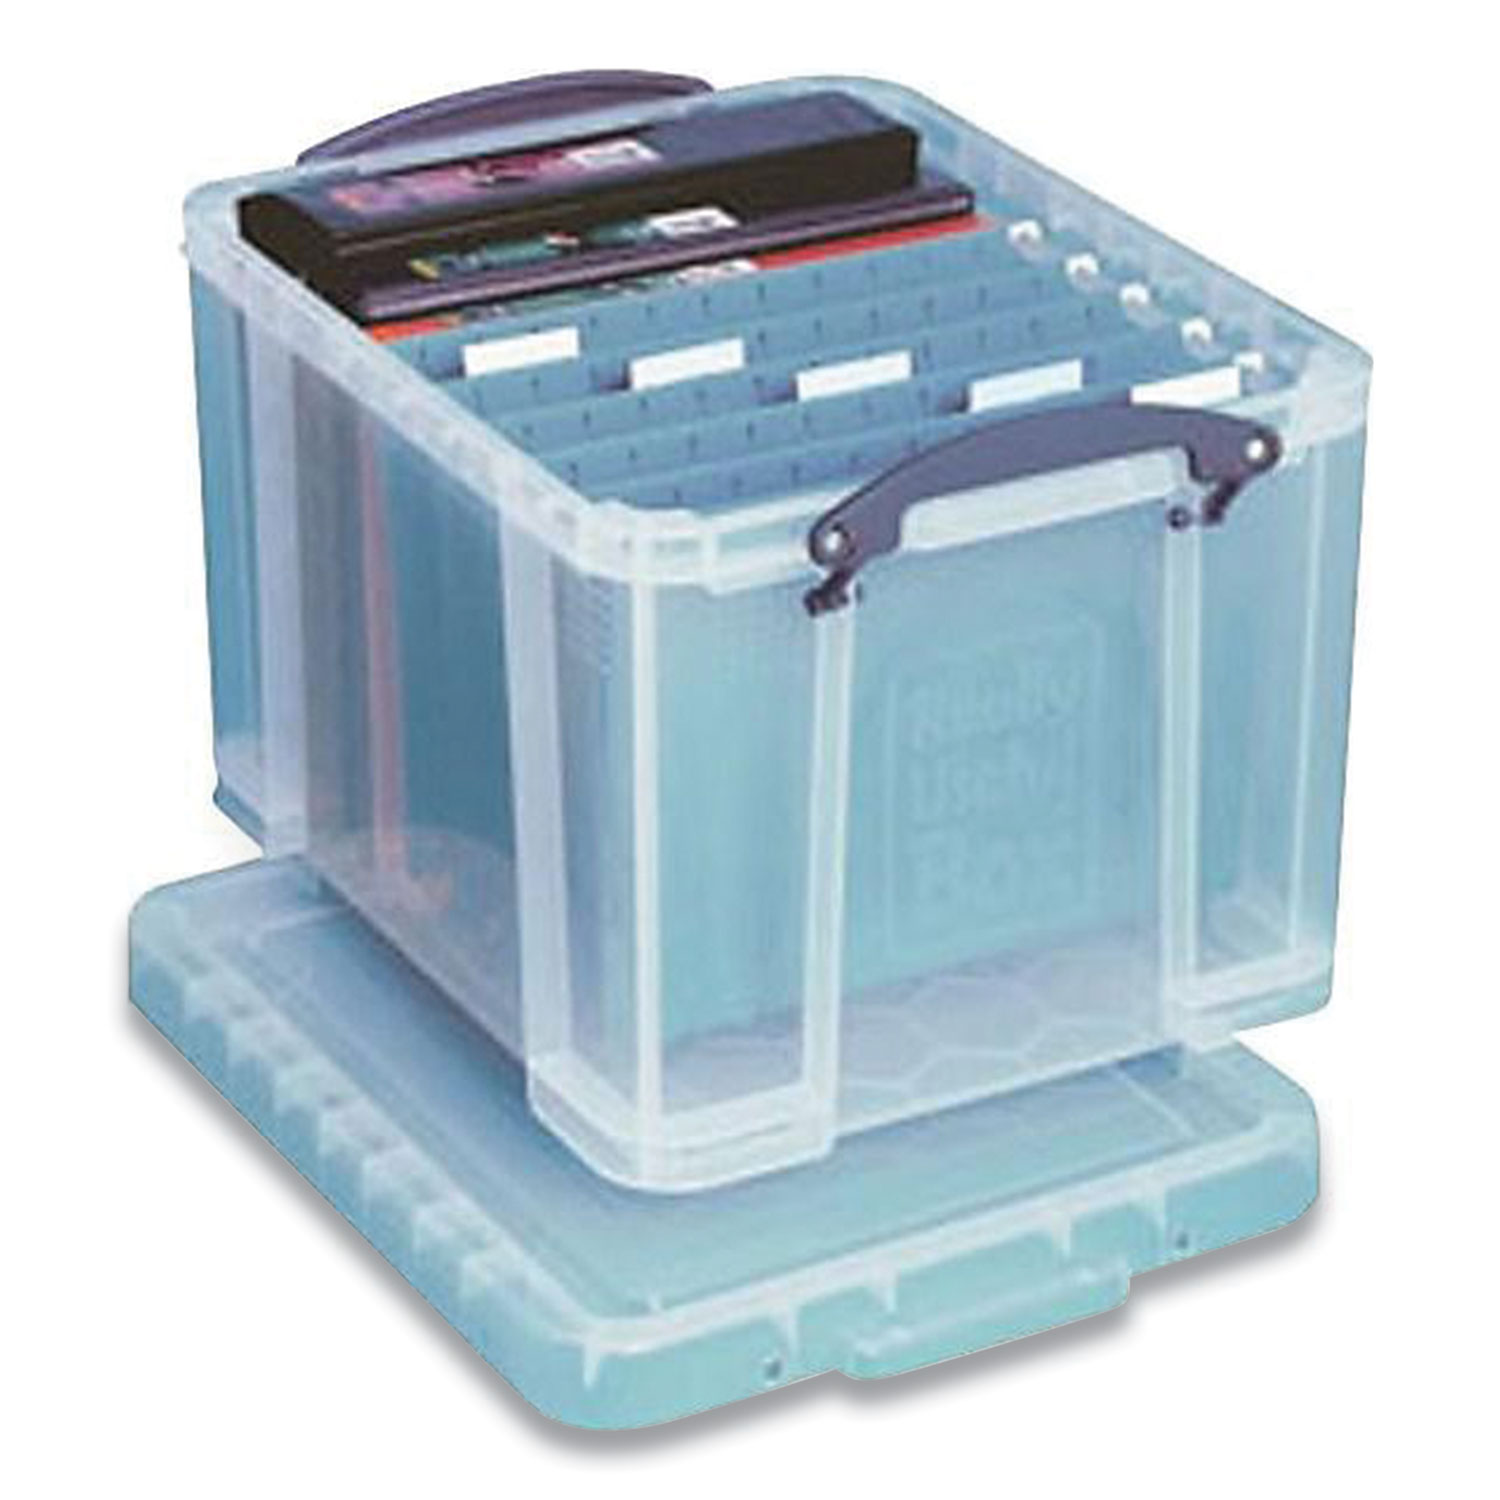  Really Useful Box 32CL Stackable File Box, Legal Files, 14.5 x 18.5 x 12.75, Clear/Blue Accents (RUA782918) 